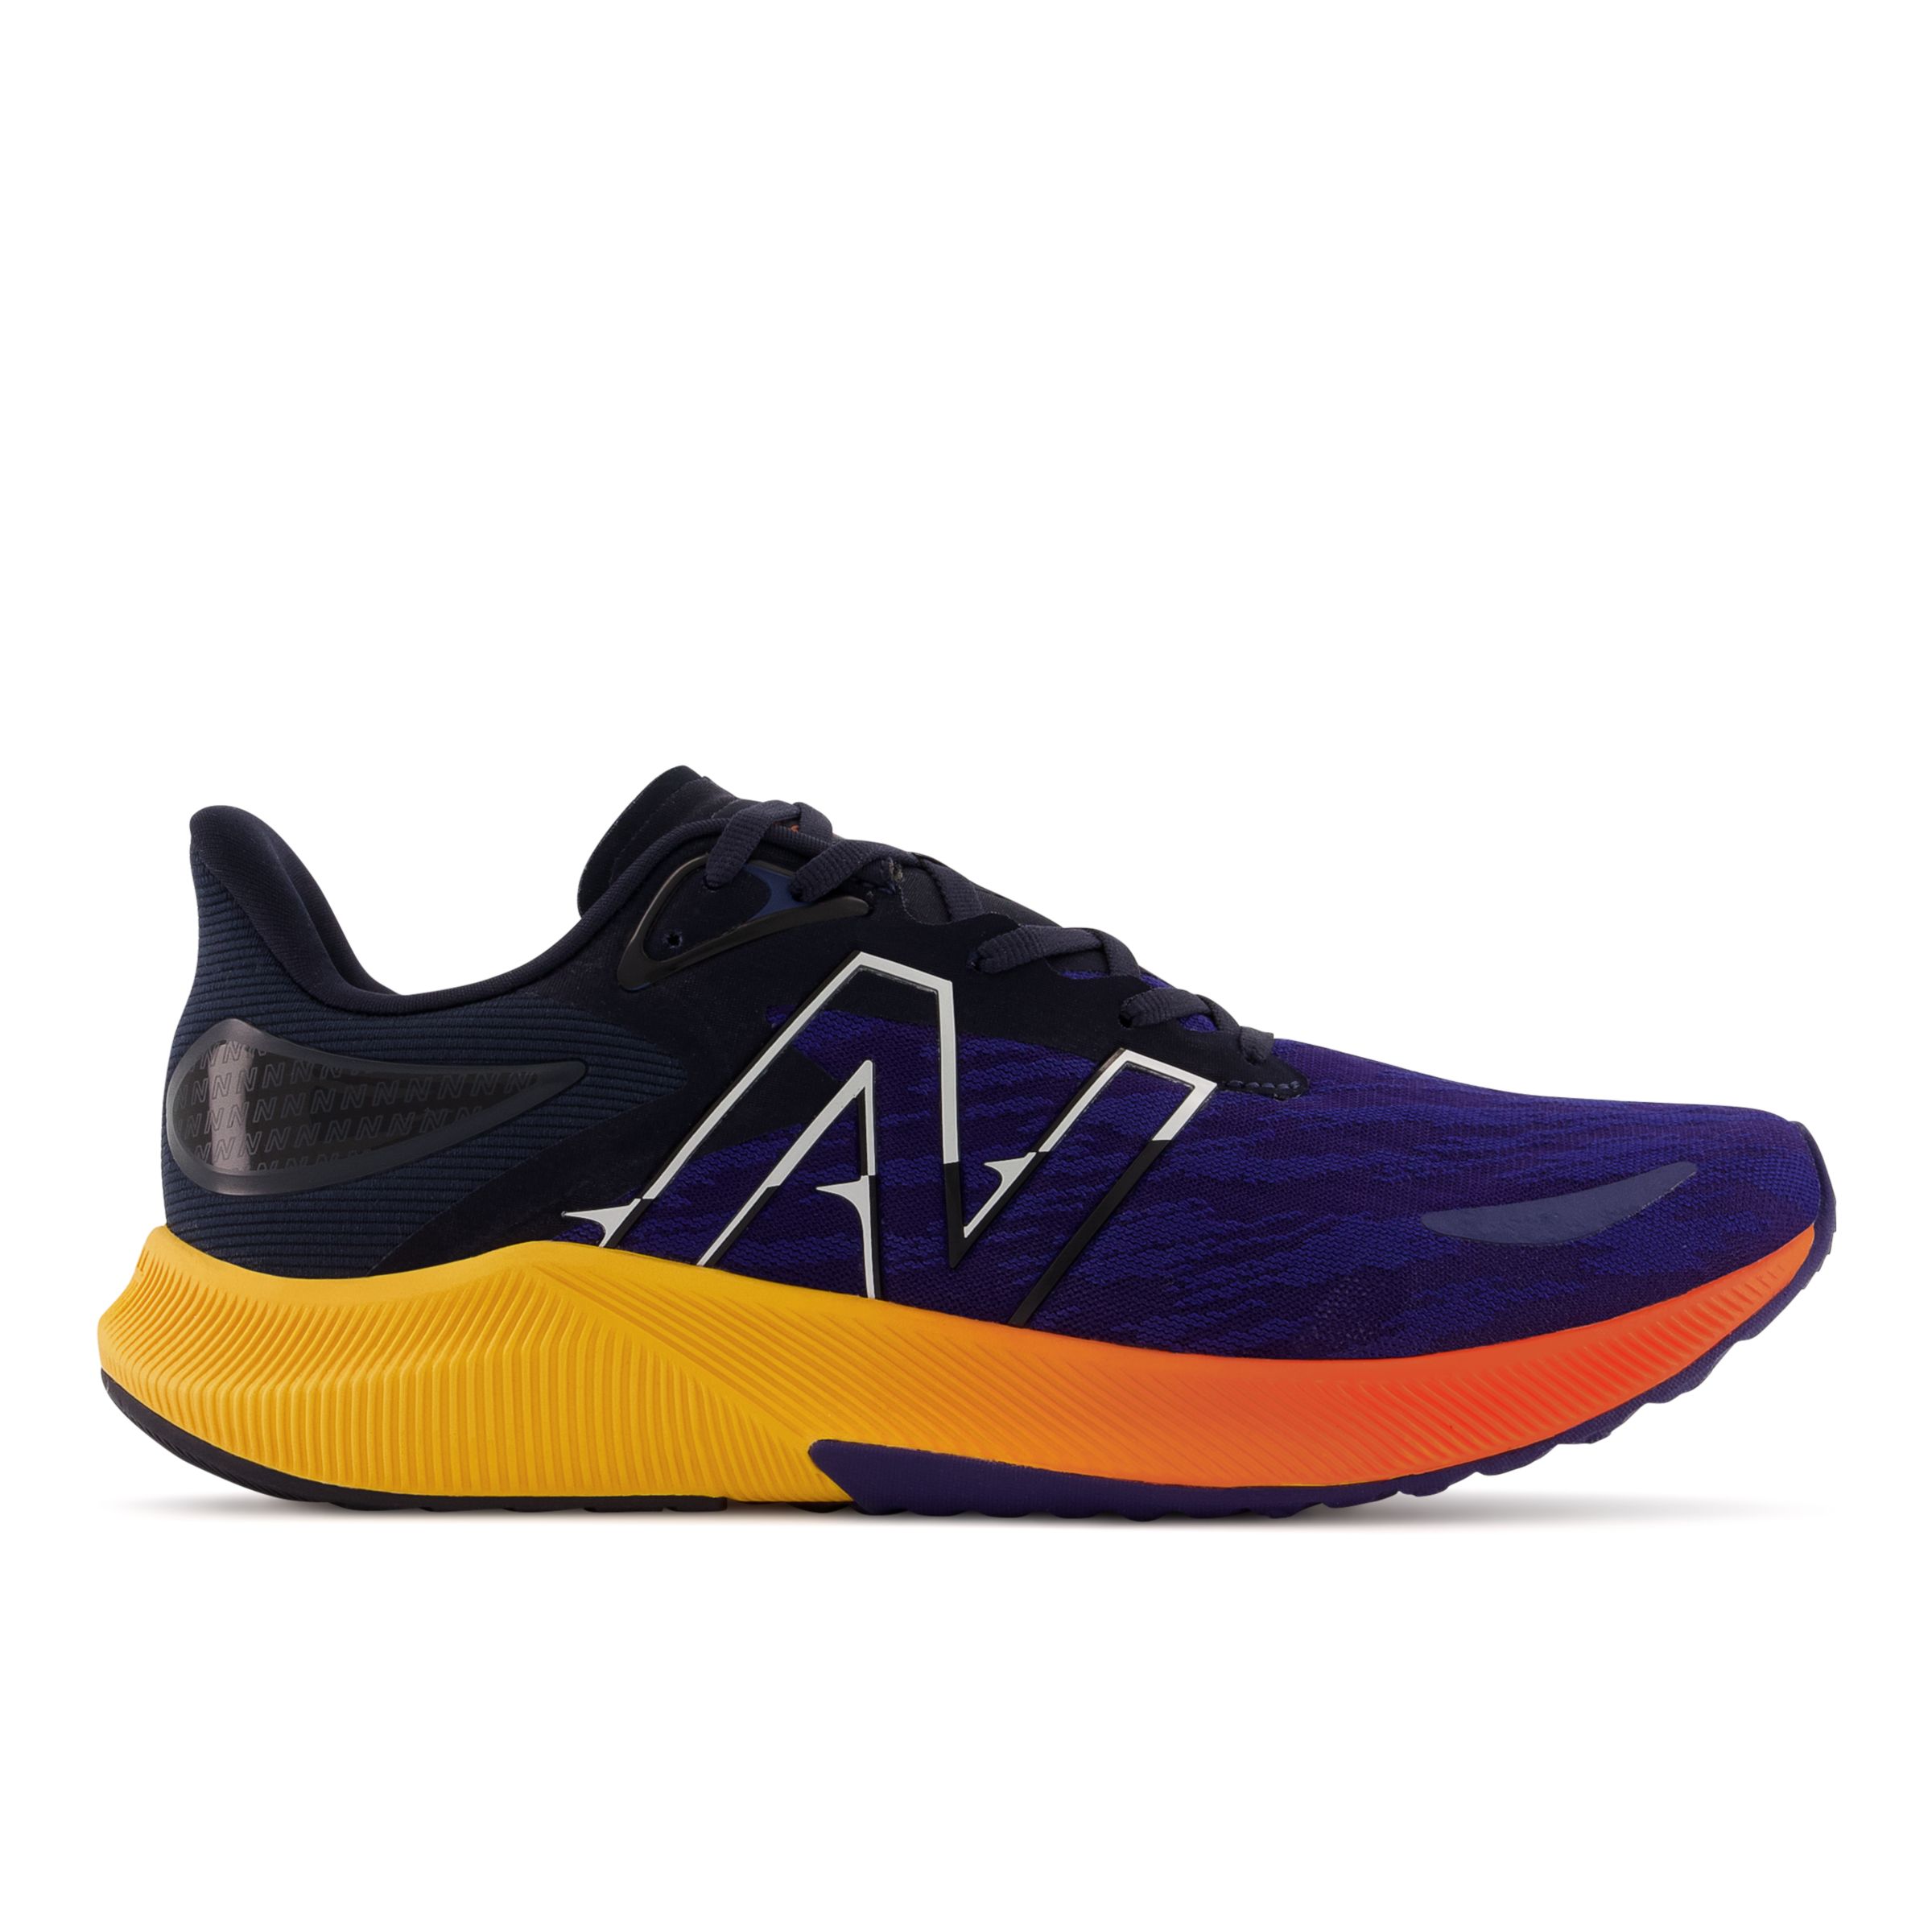 New Balance Homme FuelCell Propel v3 en Bleu/Jaune, Synthetic, Taille 44.5 Large